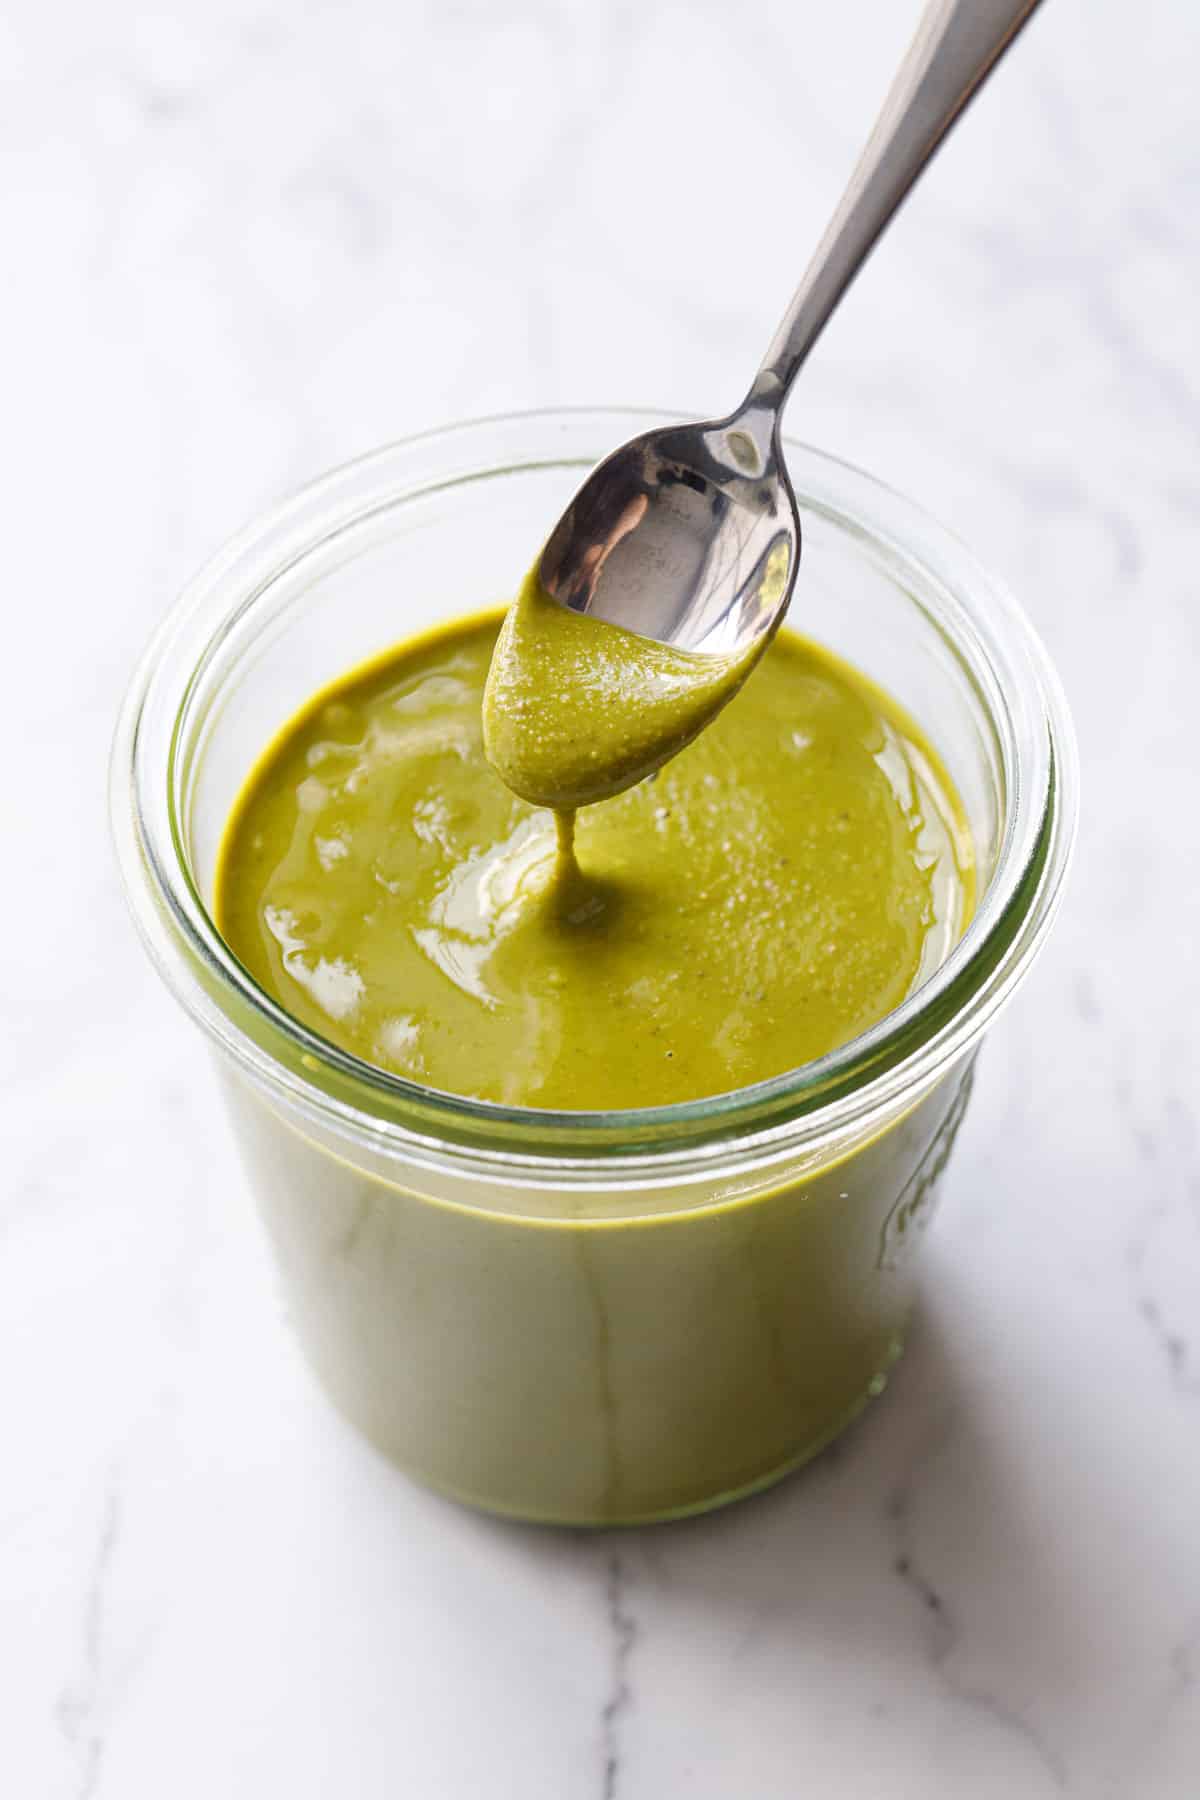 Glass jar of bright green Homemade Pistachio Butter on a marble background, spoonful lifted above to show the creamy texture.